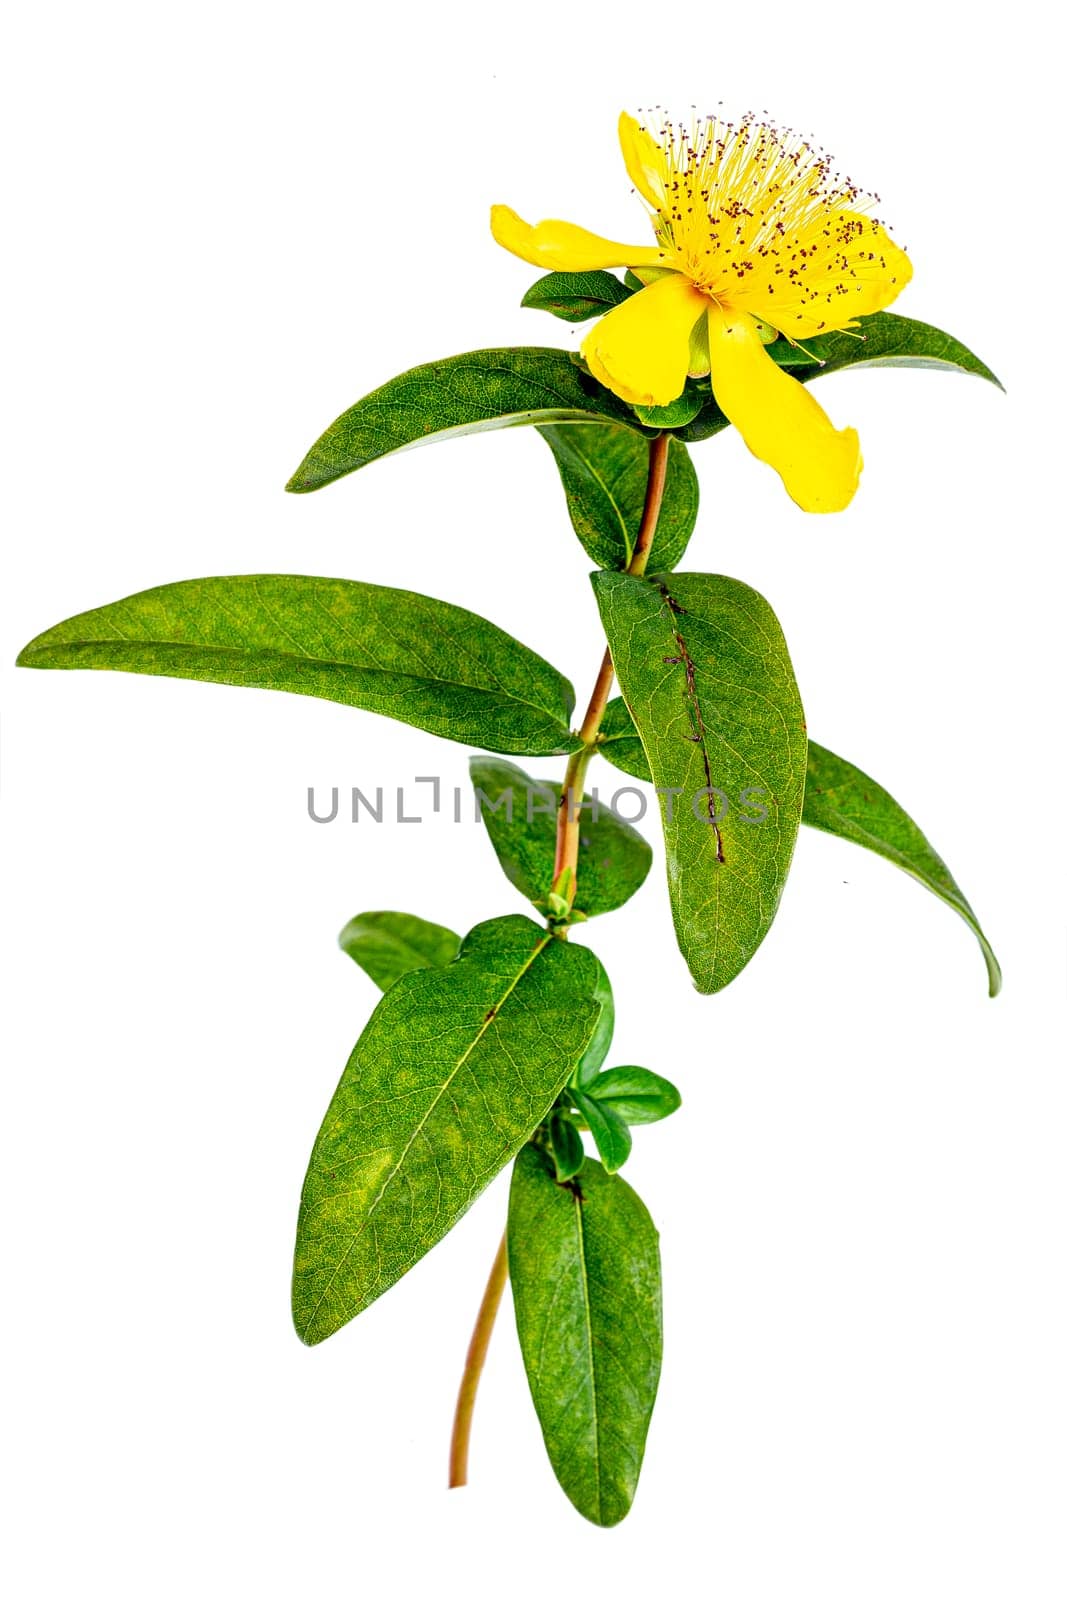 Perforate St John's-Wort Flowers Isolated on White Background. yellow flowers by JPC-PROD